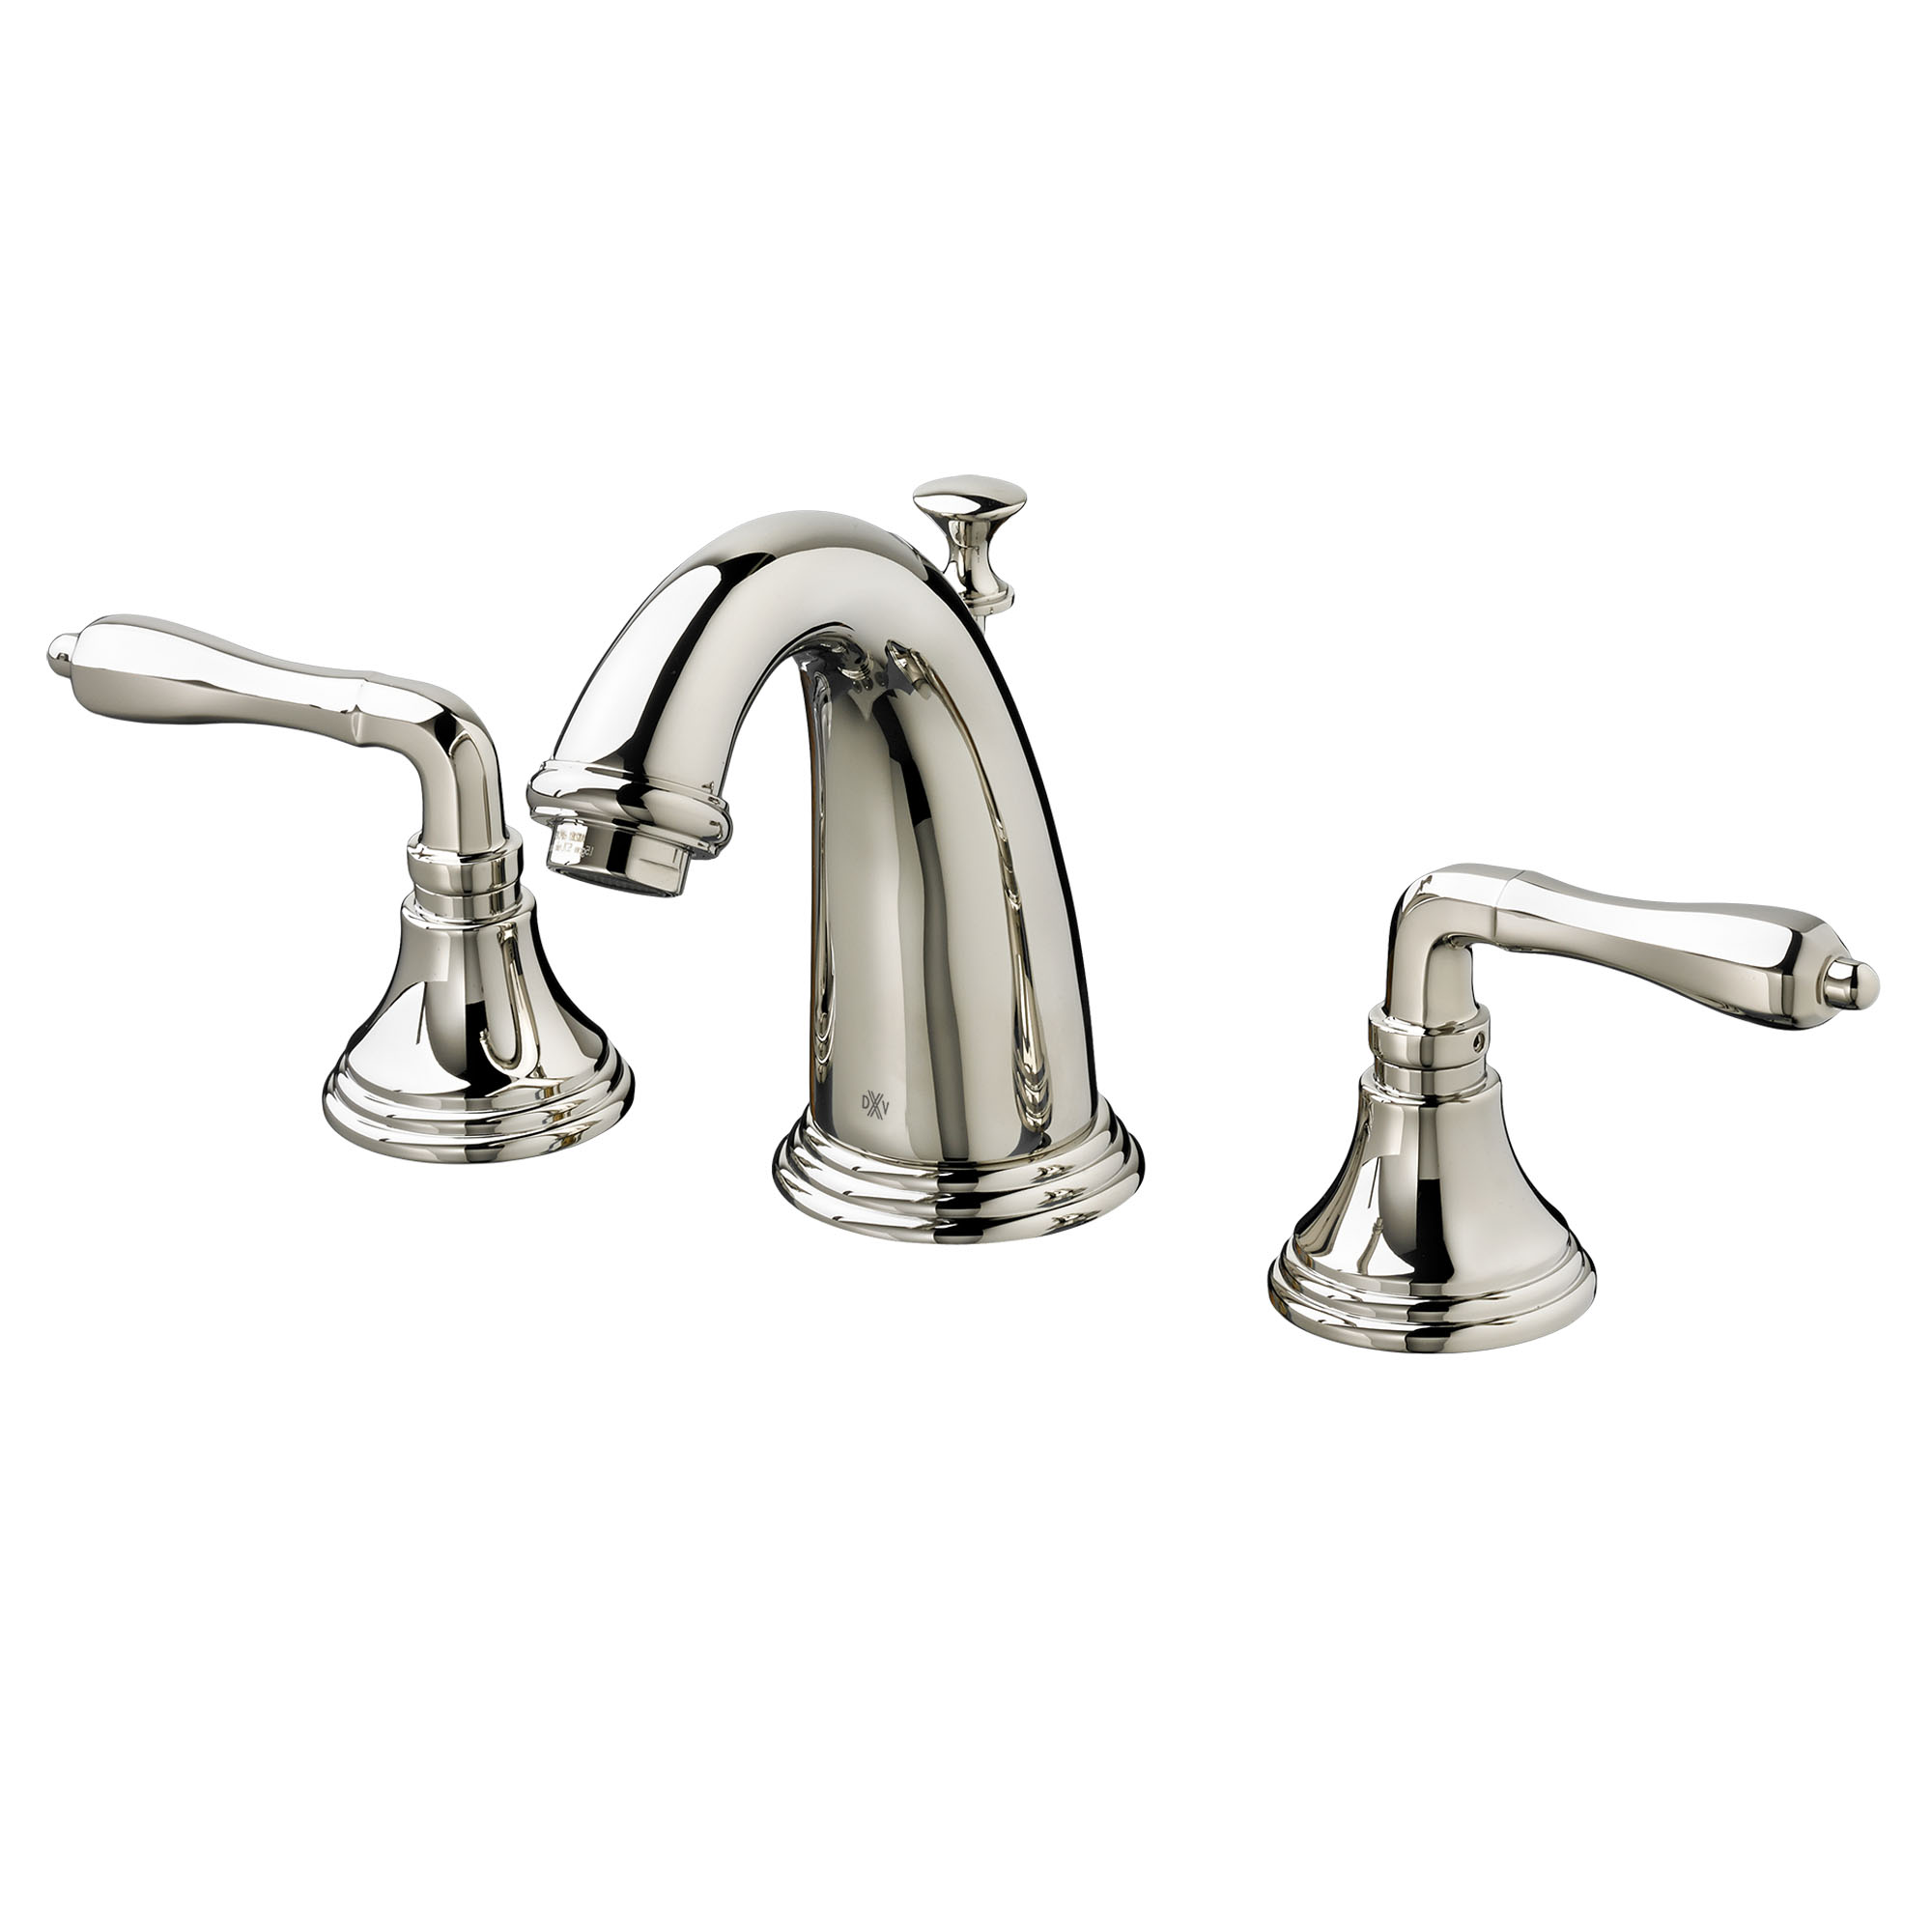 Ashbee 2-Handle Widespread Bathroon Faucet with Lever Handles